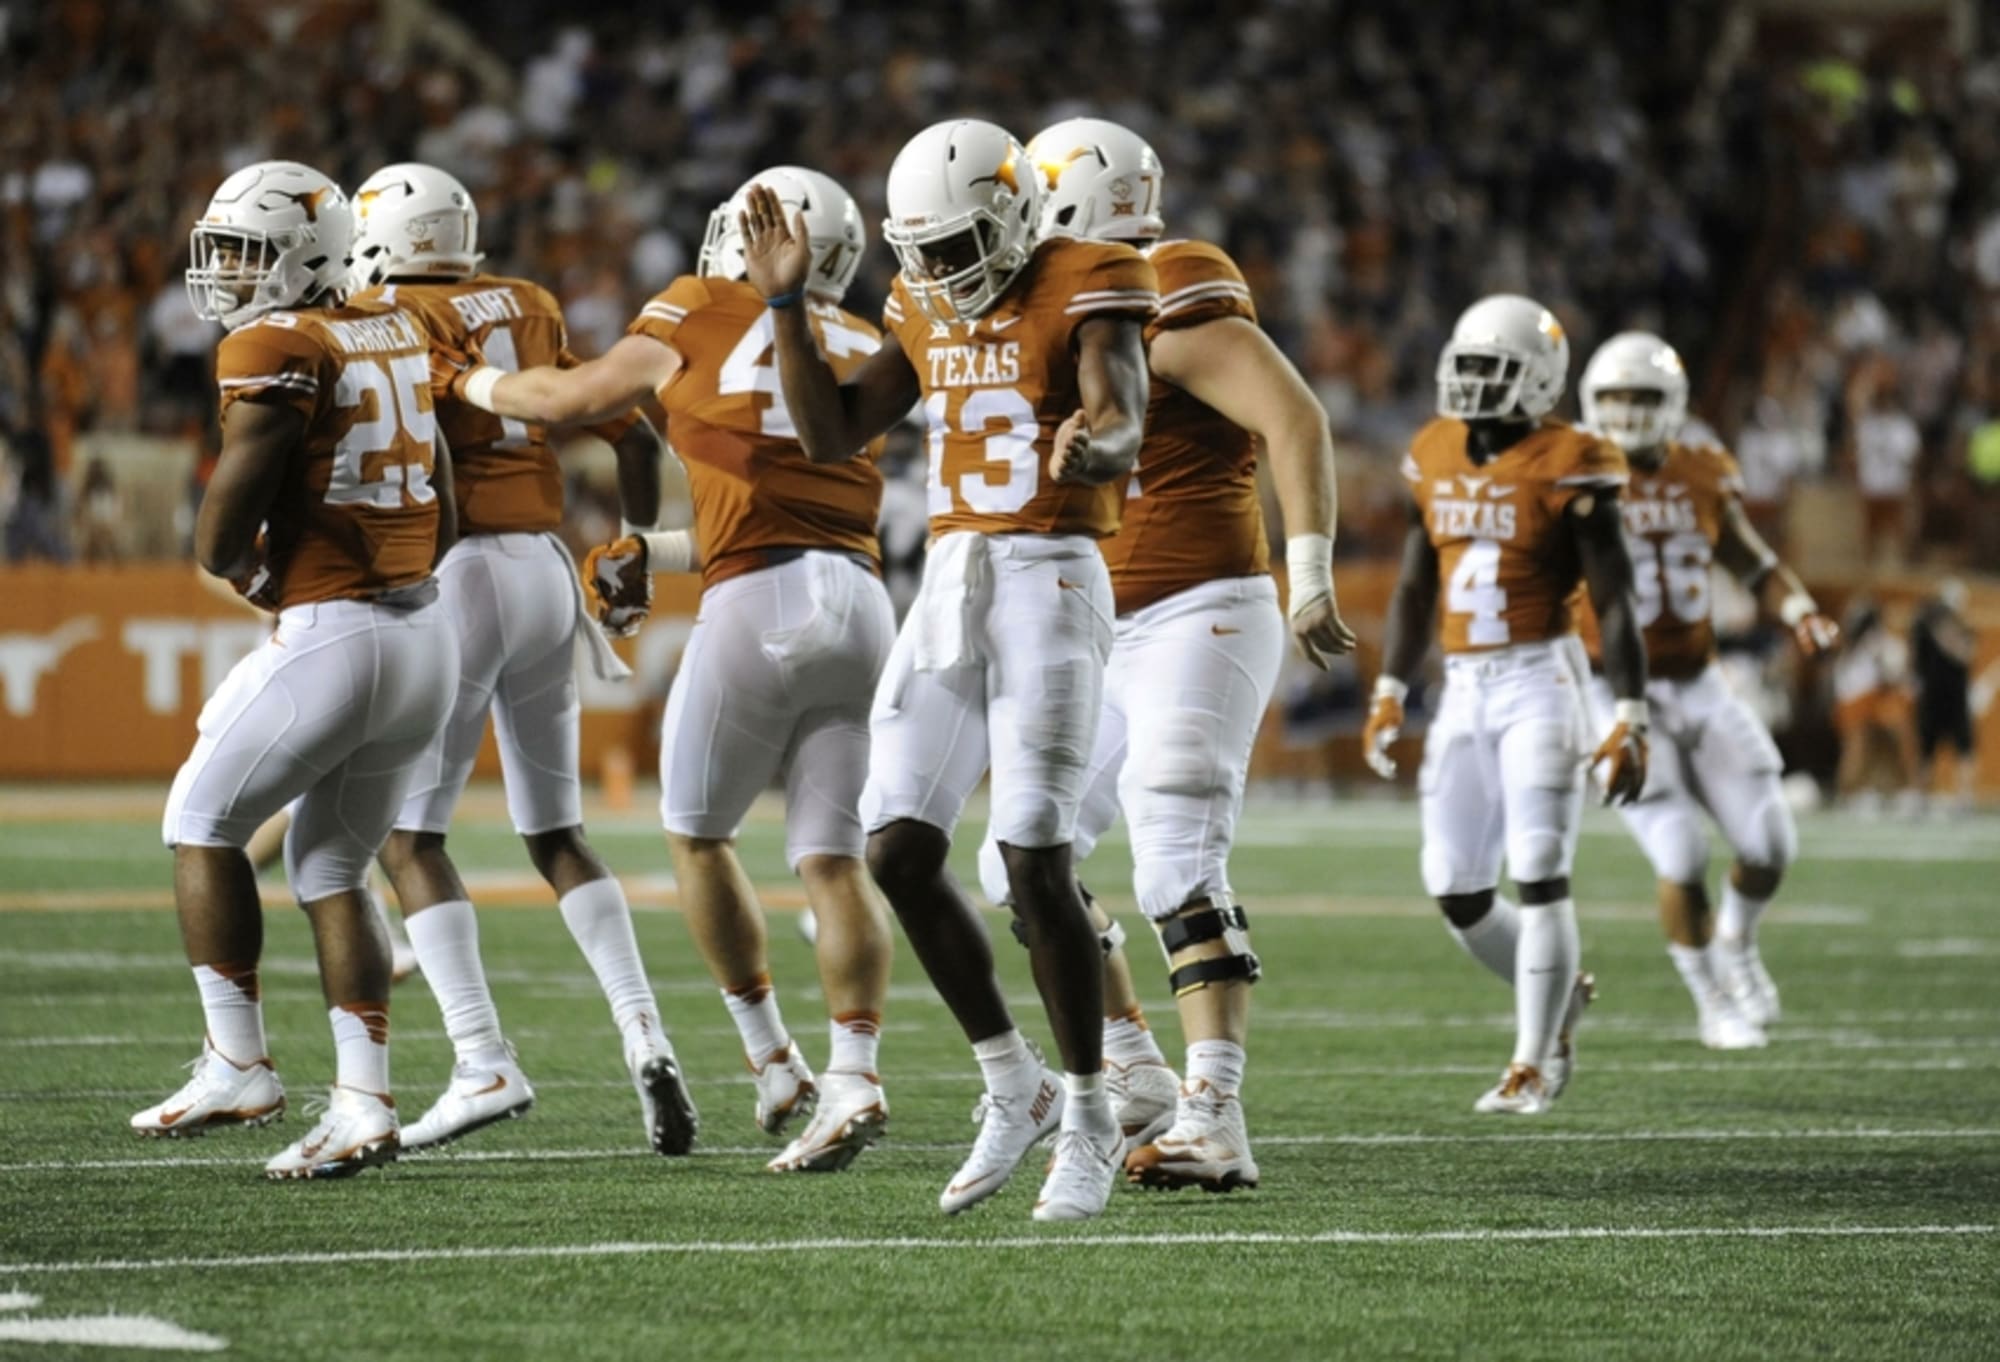 Oklahoma State Cowboys vs Texas Longhorns preview and predictions